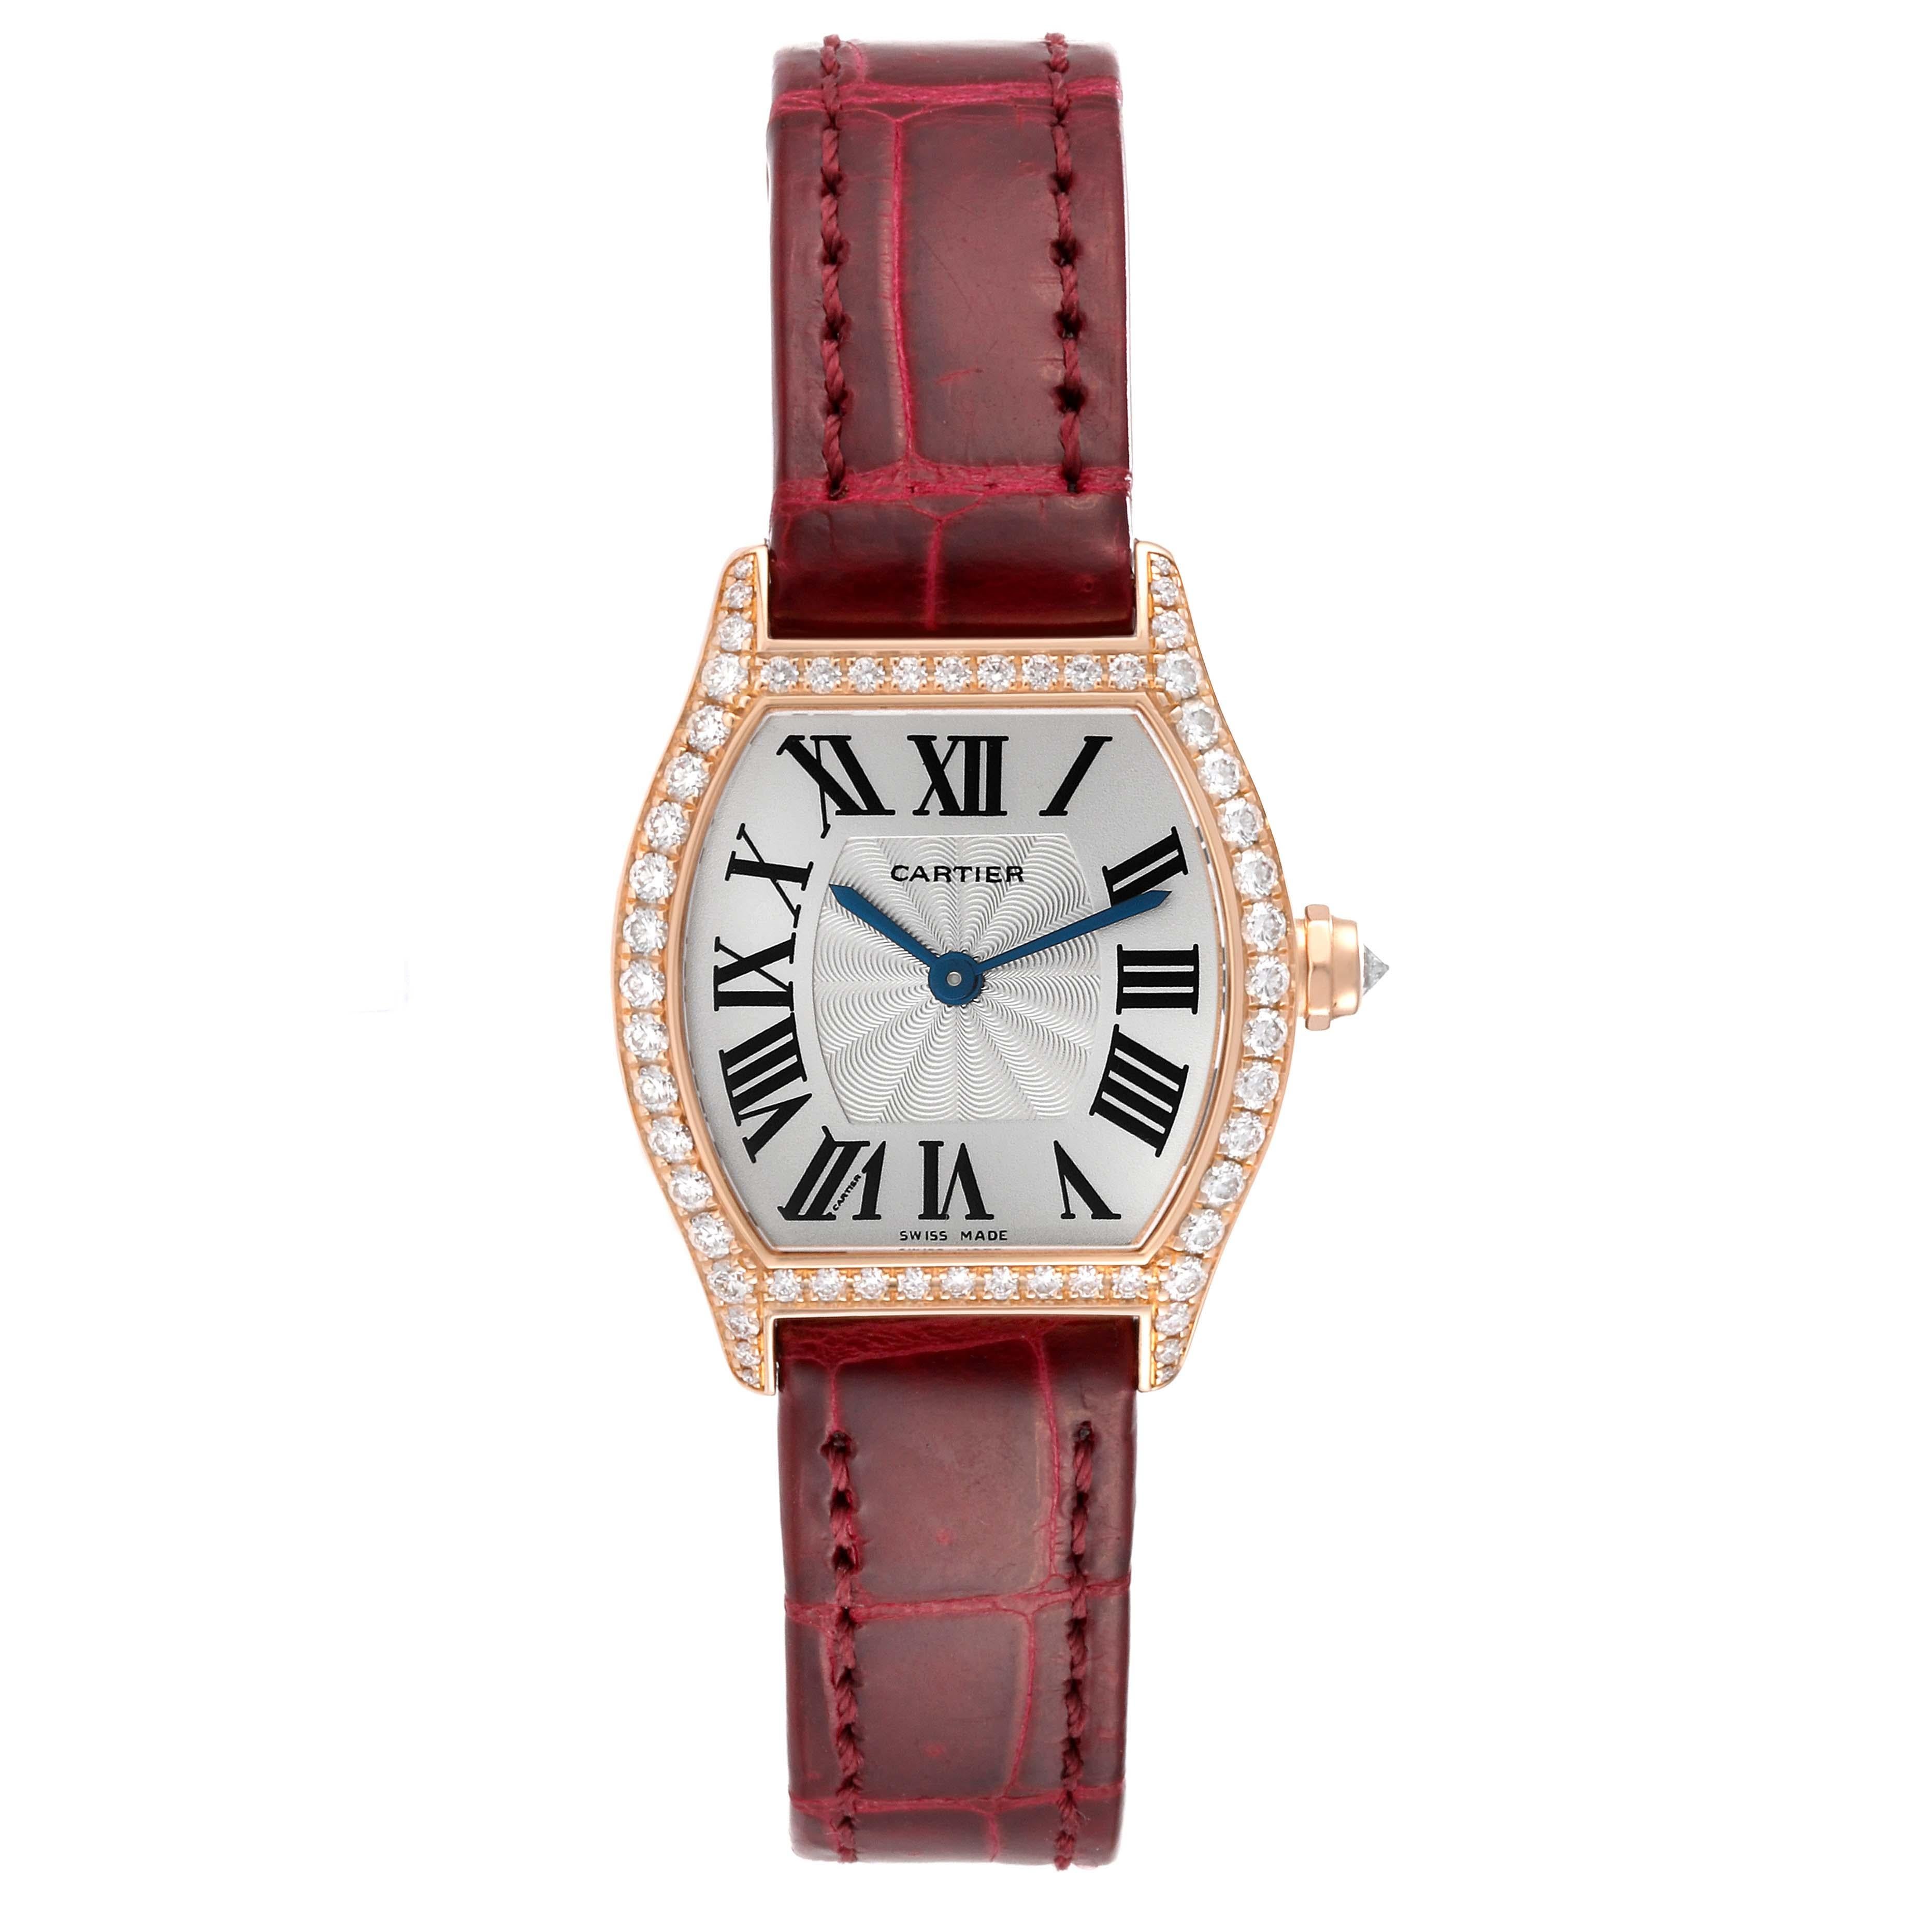 Cartier Tortue Rose Gold Diamond Ladies Watch WA501010 Papers. Manual winding movement. 18K rose gold case 24.0 x 30.0 mm. Octagonal crown set with an original Cartier factory diamond. Diamond lugs. 18K rose gold bezel with original Cartier factory